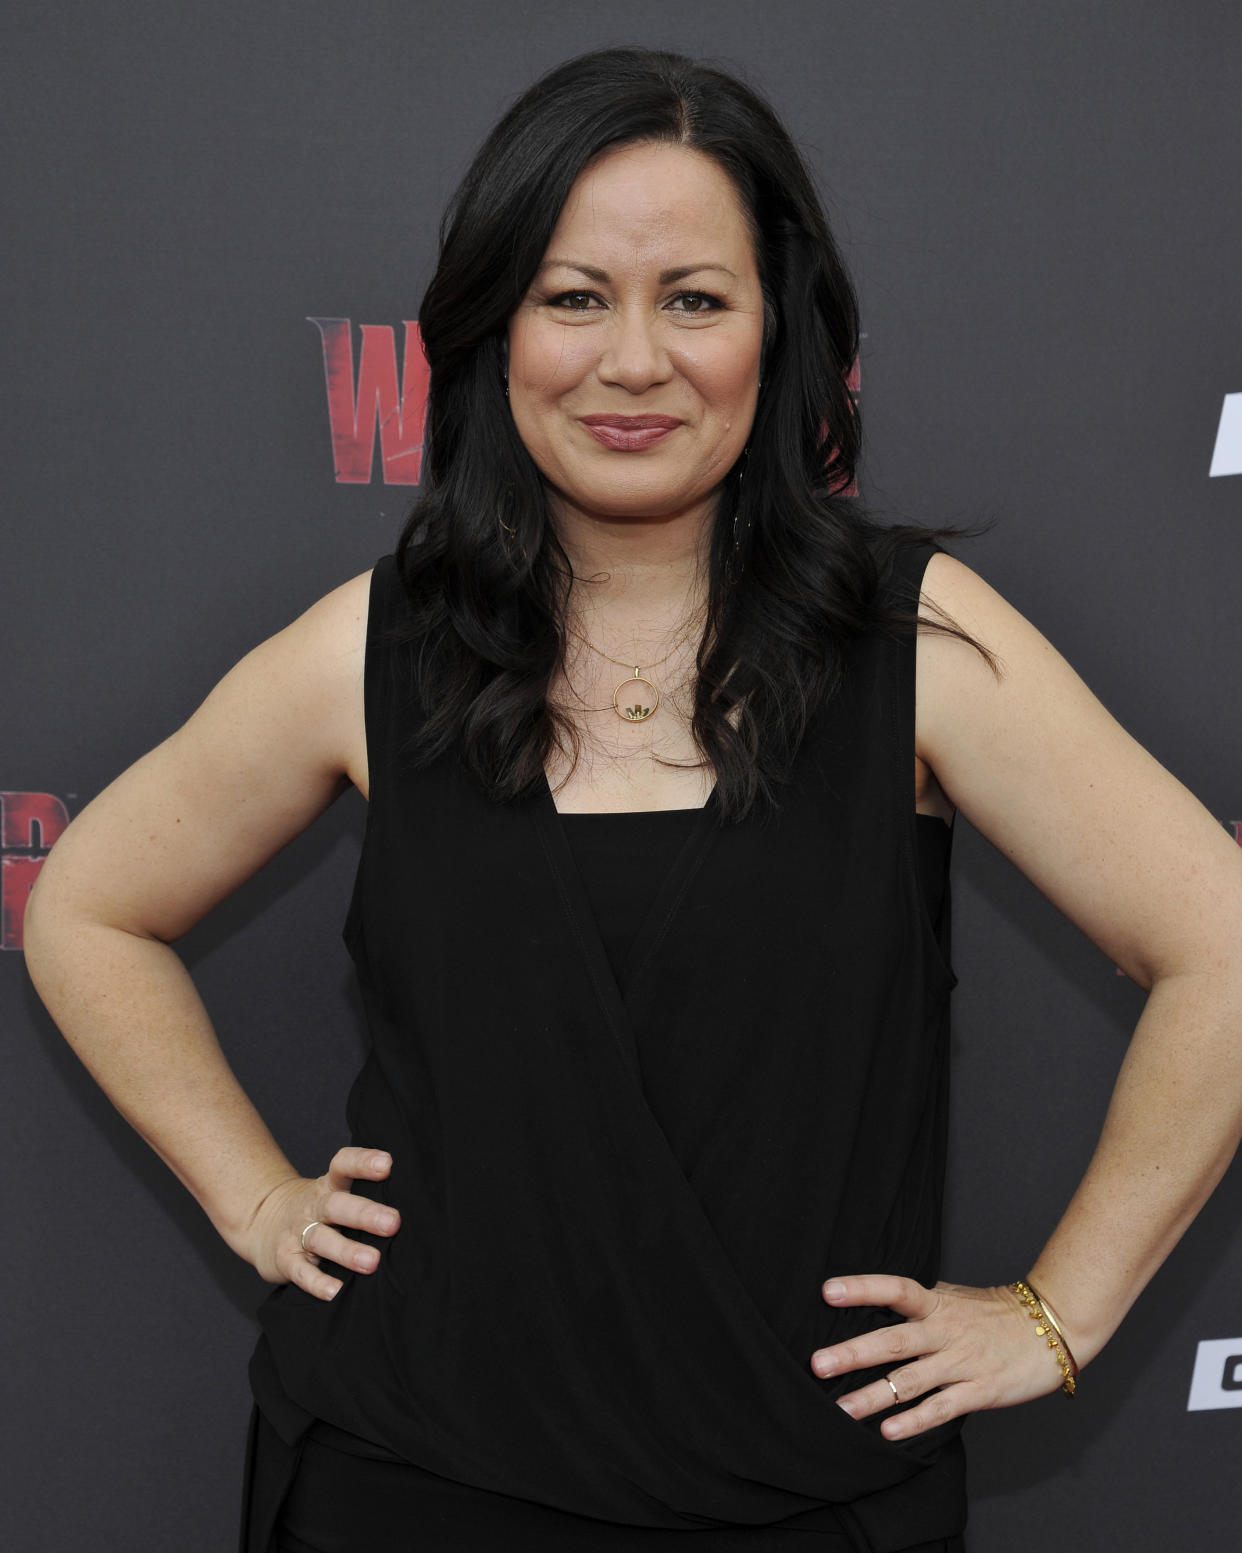 Shannon Lee in Los Angeles (John Sciulli / Getty Images for Cinemax)